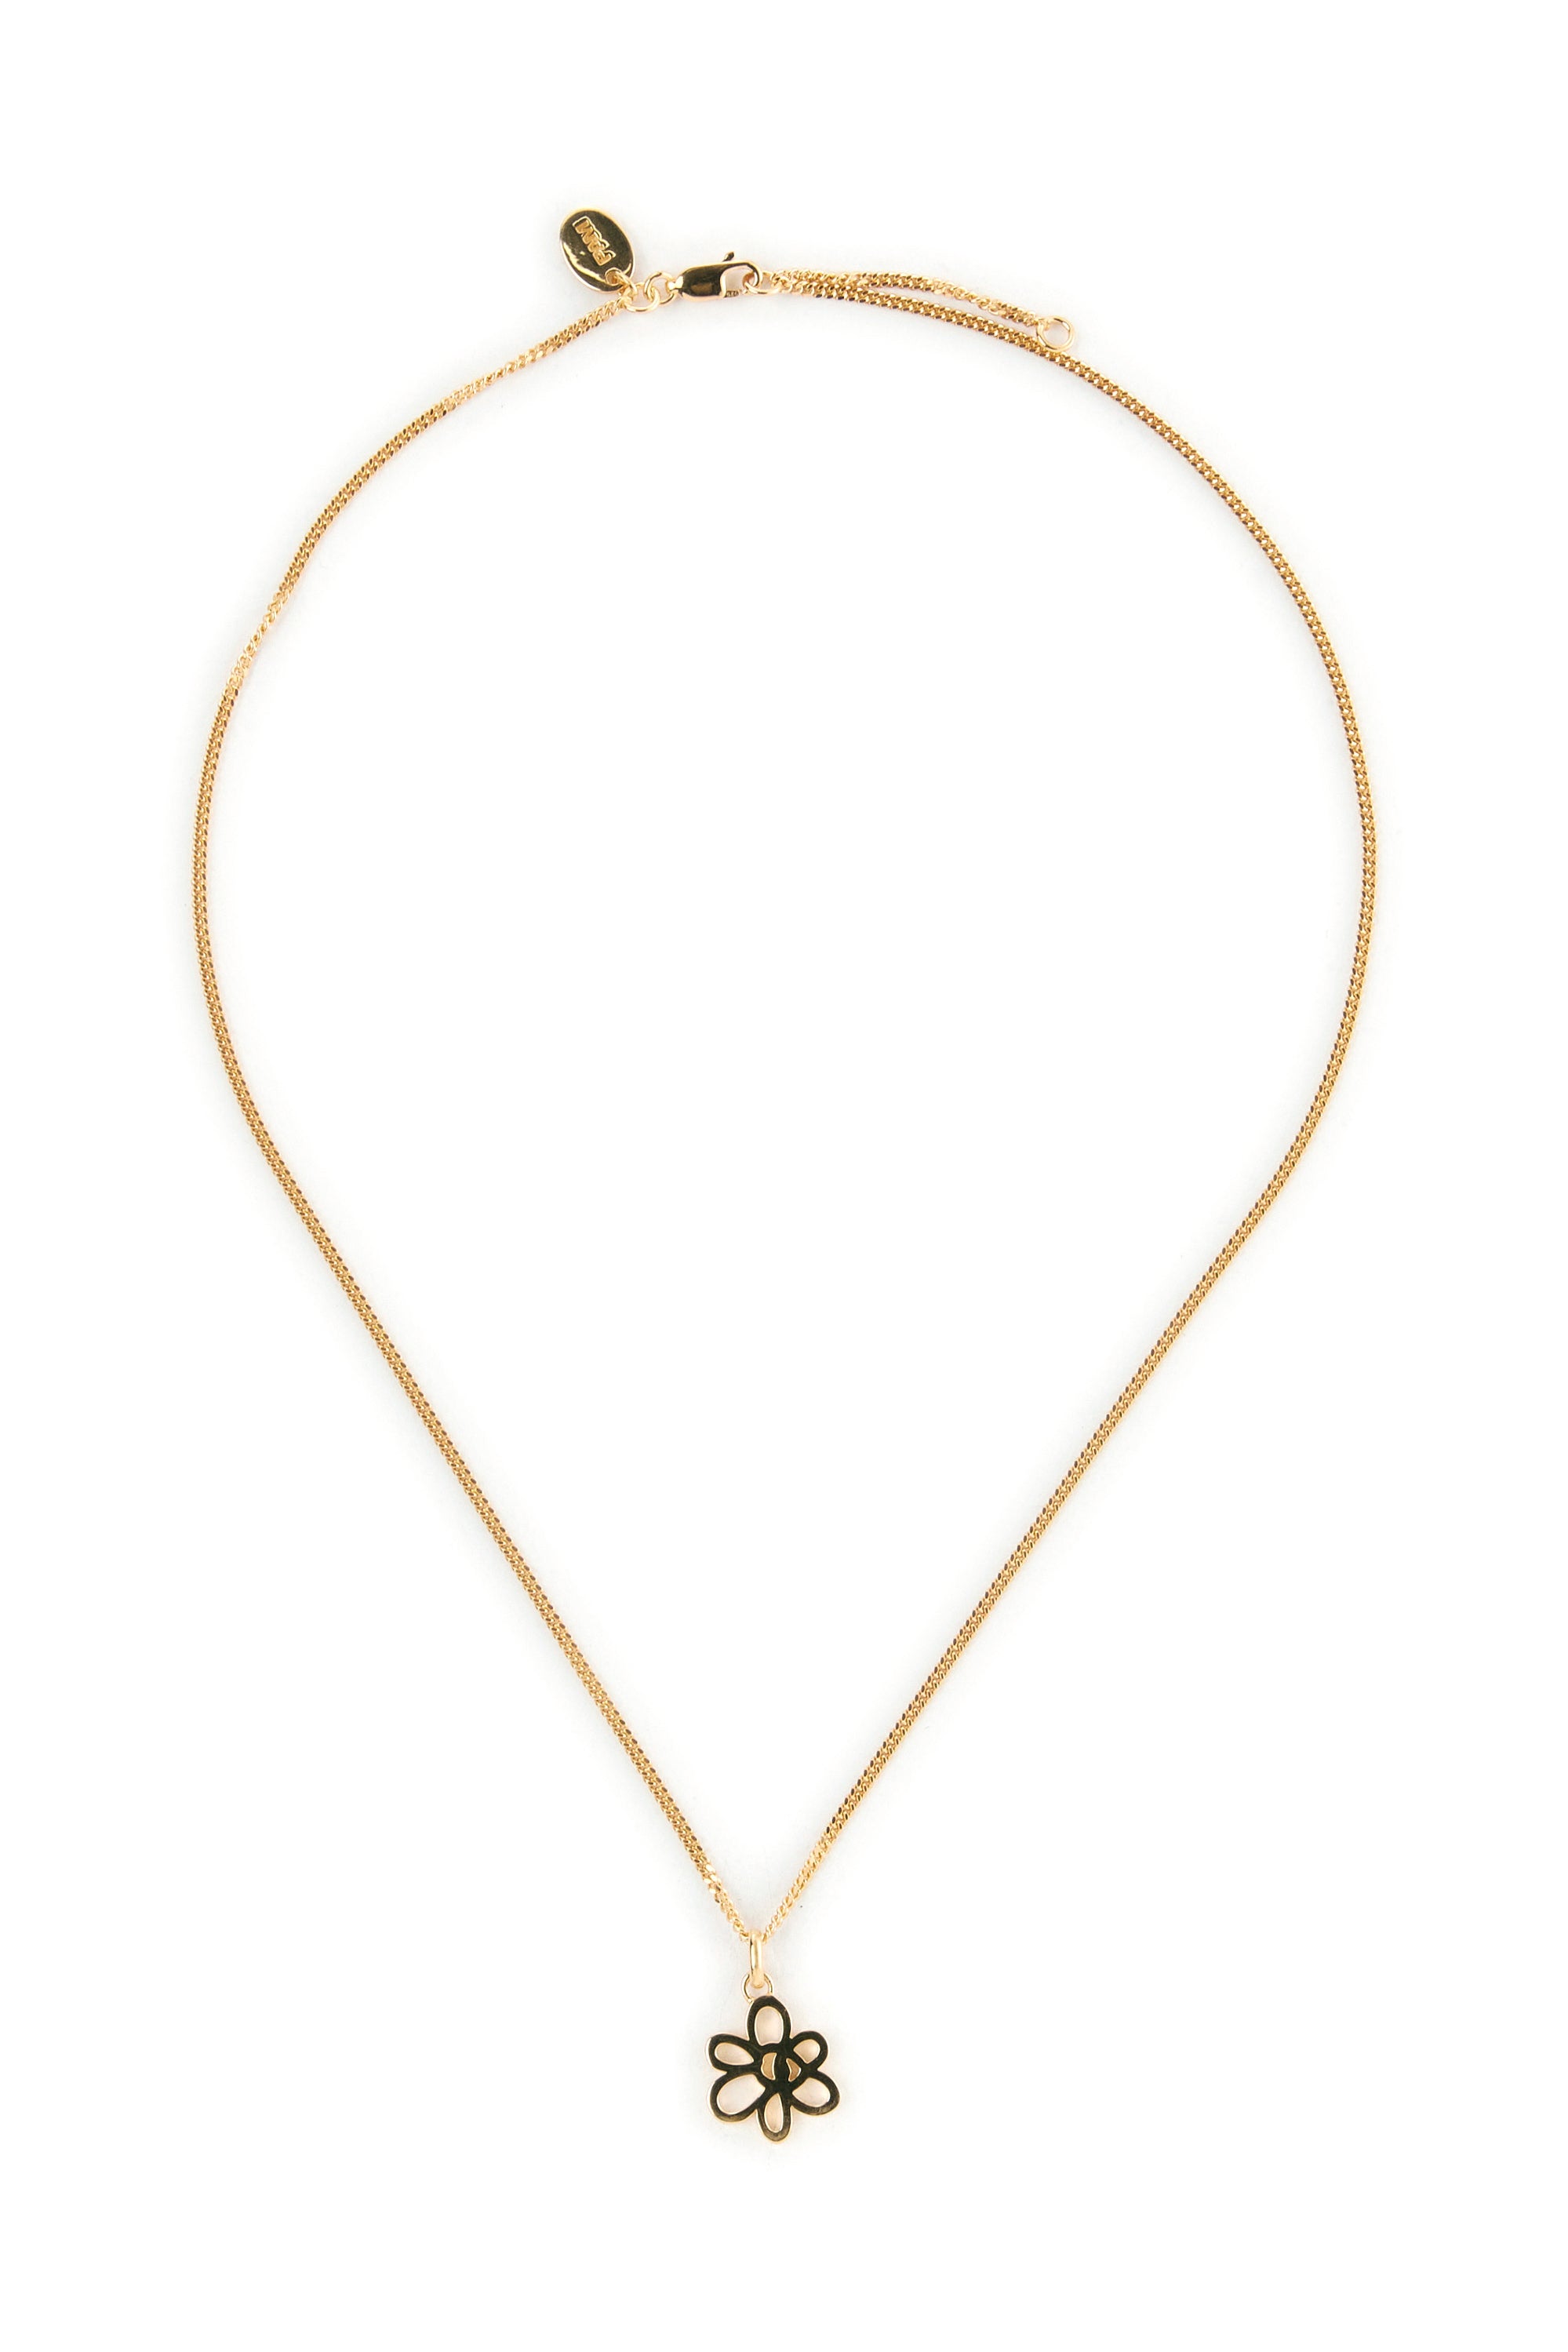 The GATEWAY FRAME GOLD GESTURE NECKLACE  available online with global shipping, and in PAM Stores Melbourne and Sydney.